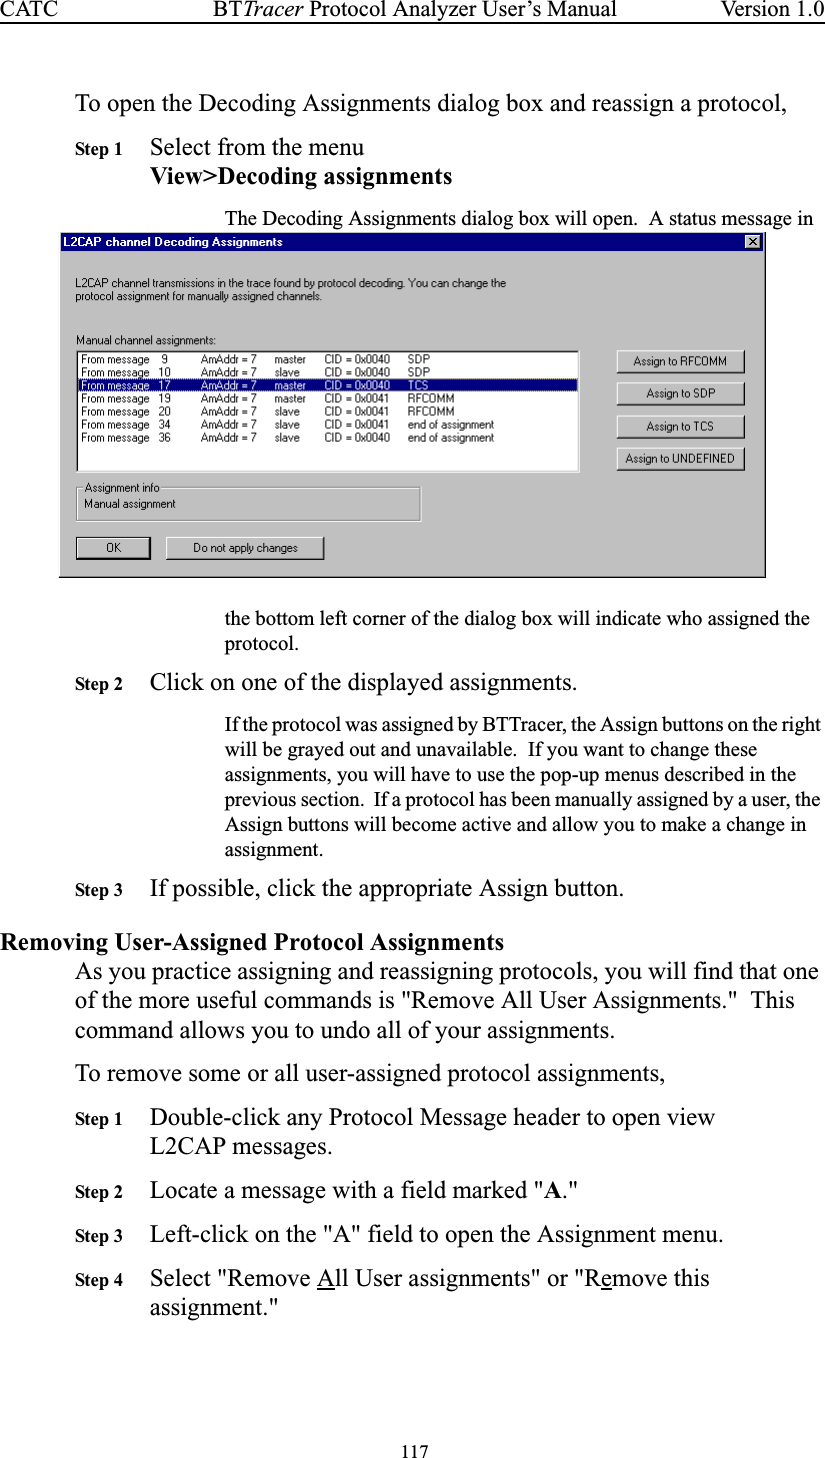 117BTTracer Protocol Analyzer User’s ManualCATC Version 1.0To open the Decoding Assignments dialog box and reassign a protocol,Step 1 Select from the menuView&gt;Decoding assignmentsThe Decoding Assignments dialog box will open. A status message inthe bottom left corner of the dialog box will indicate who assigned theprotocol.Step 2 Click on one of the displayed assignments.If the protocol was assigned by BTTracer, the Assign buttons on the rightwill be grayed out and unavailable. If you want to change theseassignments, you will have to use the pop-up menus described in theprevious section. If a protocol has been manually assigned by a user, theAssign buttons will become active and allow you to make a change inassignment.Step 3 If possible, click the appropriate Assign button.Removing User-Assigned Protocol AssignmentsAs you practice assigning and reassigning protocols, you will find that oneof the more useful commands is &quot;Remove All User Assignments.&quot; Thiscommand allows you to undo all of your assignments.To remove some or all user-assigned protocol assignments,Step 1 Double-click any Protocol Message header to open viewL2CAP messages.Step 2 Locate a message with a field marked &quot;A.&quot;Step 3 Left-click on the &quot;A&quot; field to open the Assignment menu.Step 4 Select &quot;Remove All User assignments&quot; or &quot;Remove thisassignment.&quot;